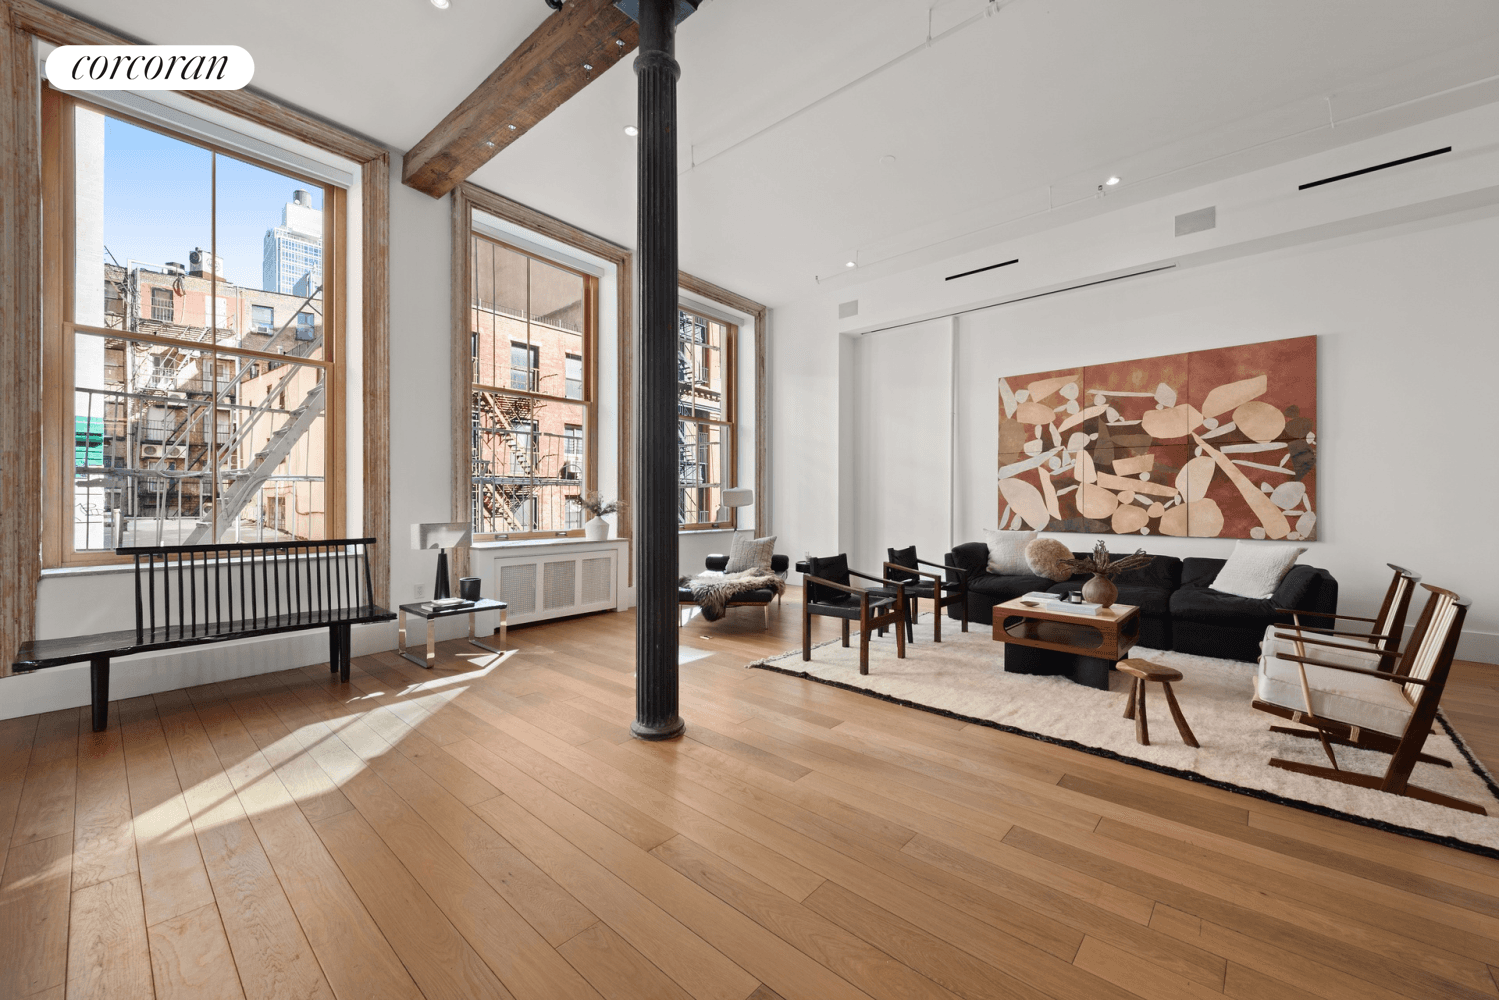 A true Extra Wide Tribeca Loft, this flawlessly renovated home features coveted original details highlighted by premier designer updates to create one of the finest three bedroom, two and a ...